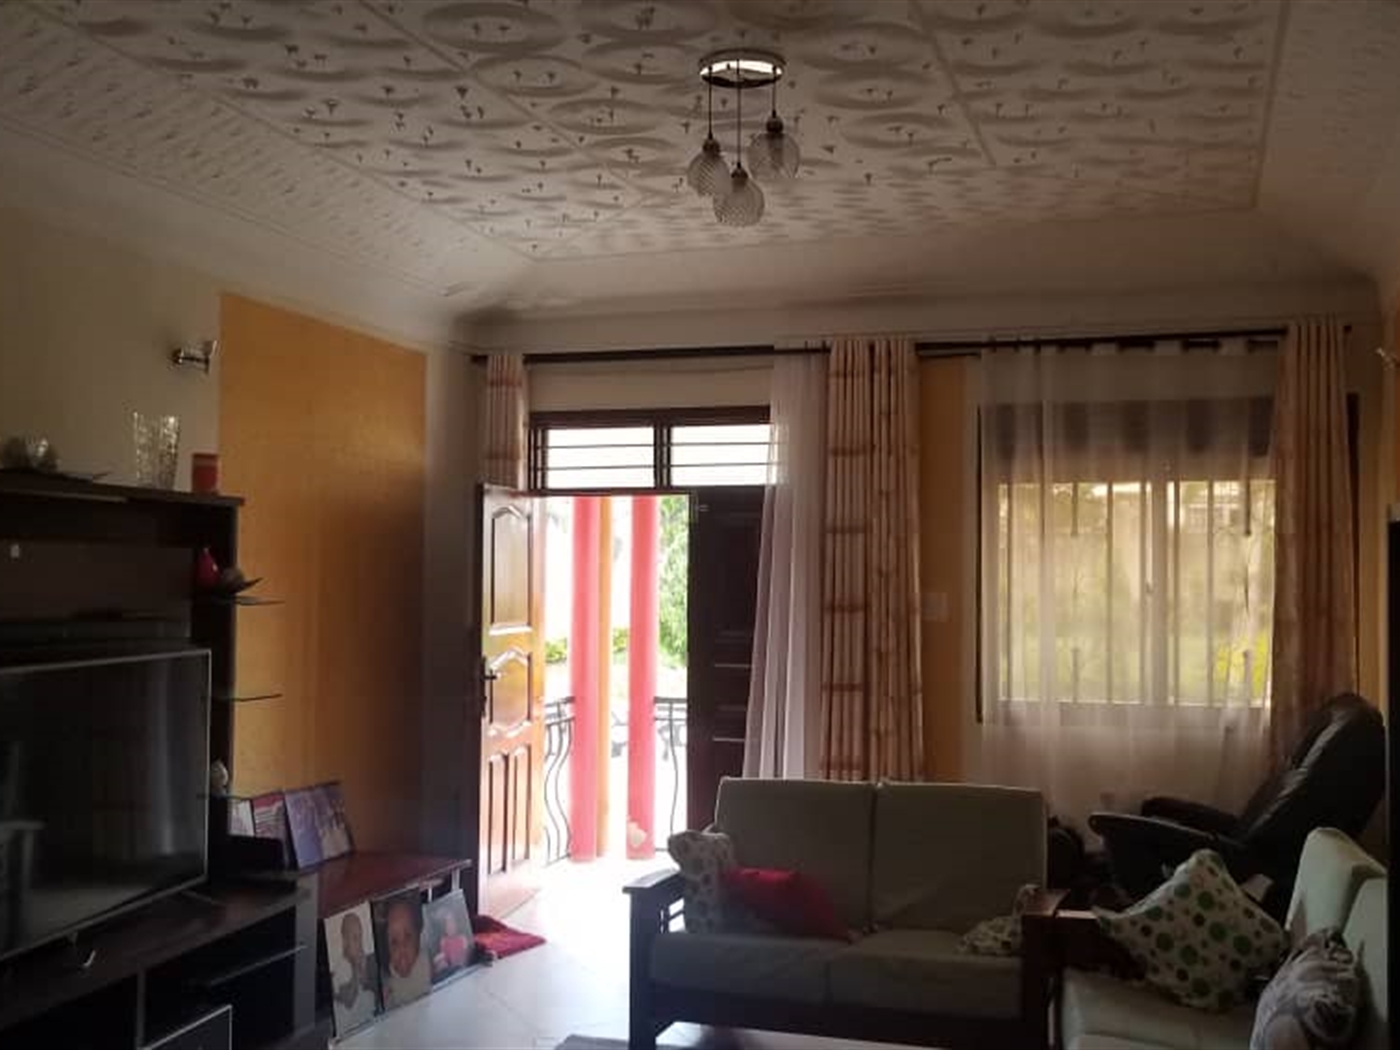 Town House for sale in Sonde Mukono